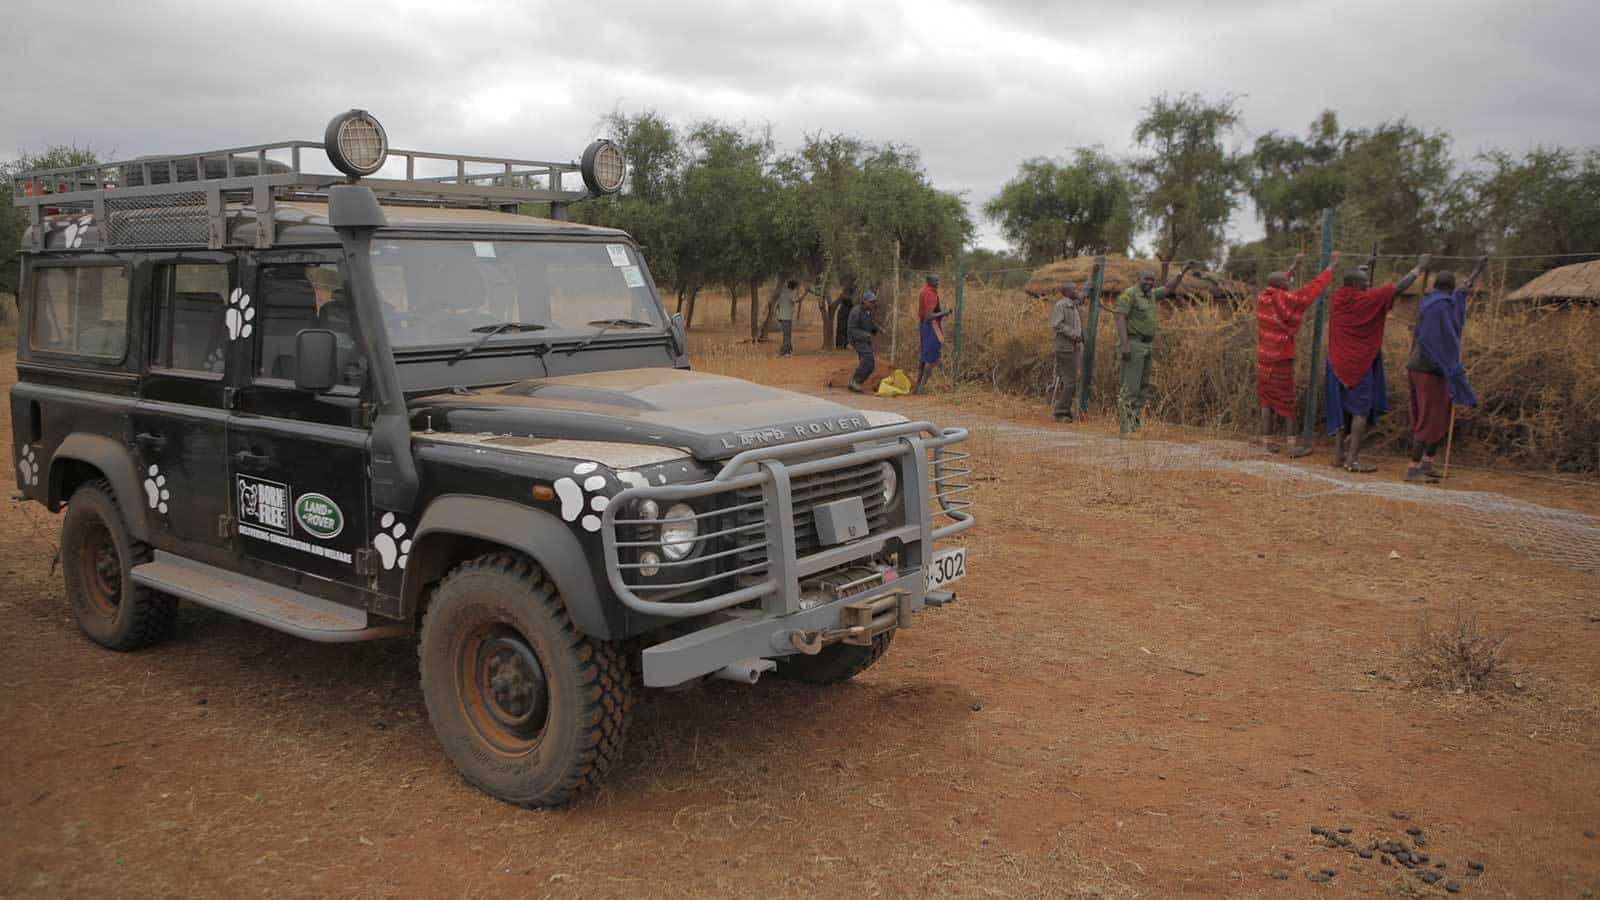 Land Rover Vehicle Parked Next to Boma Fence